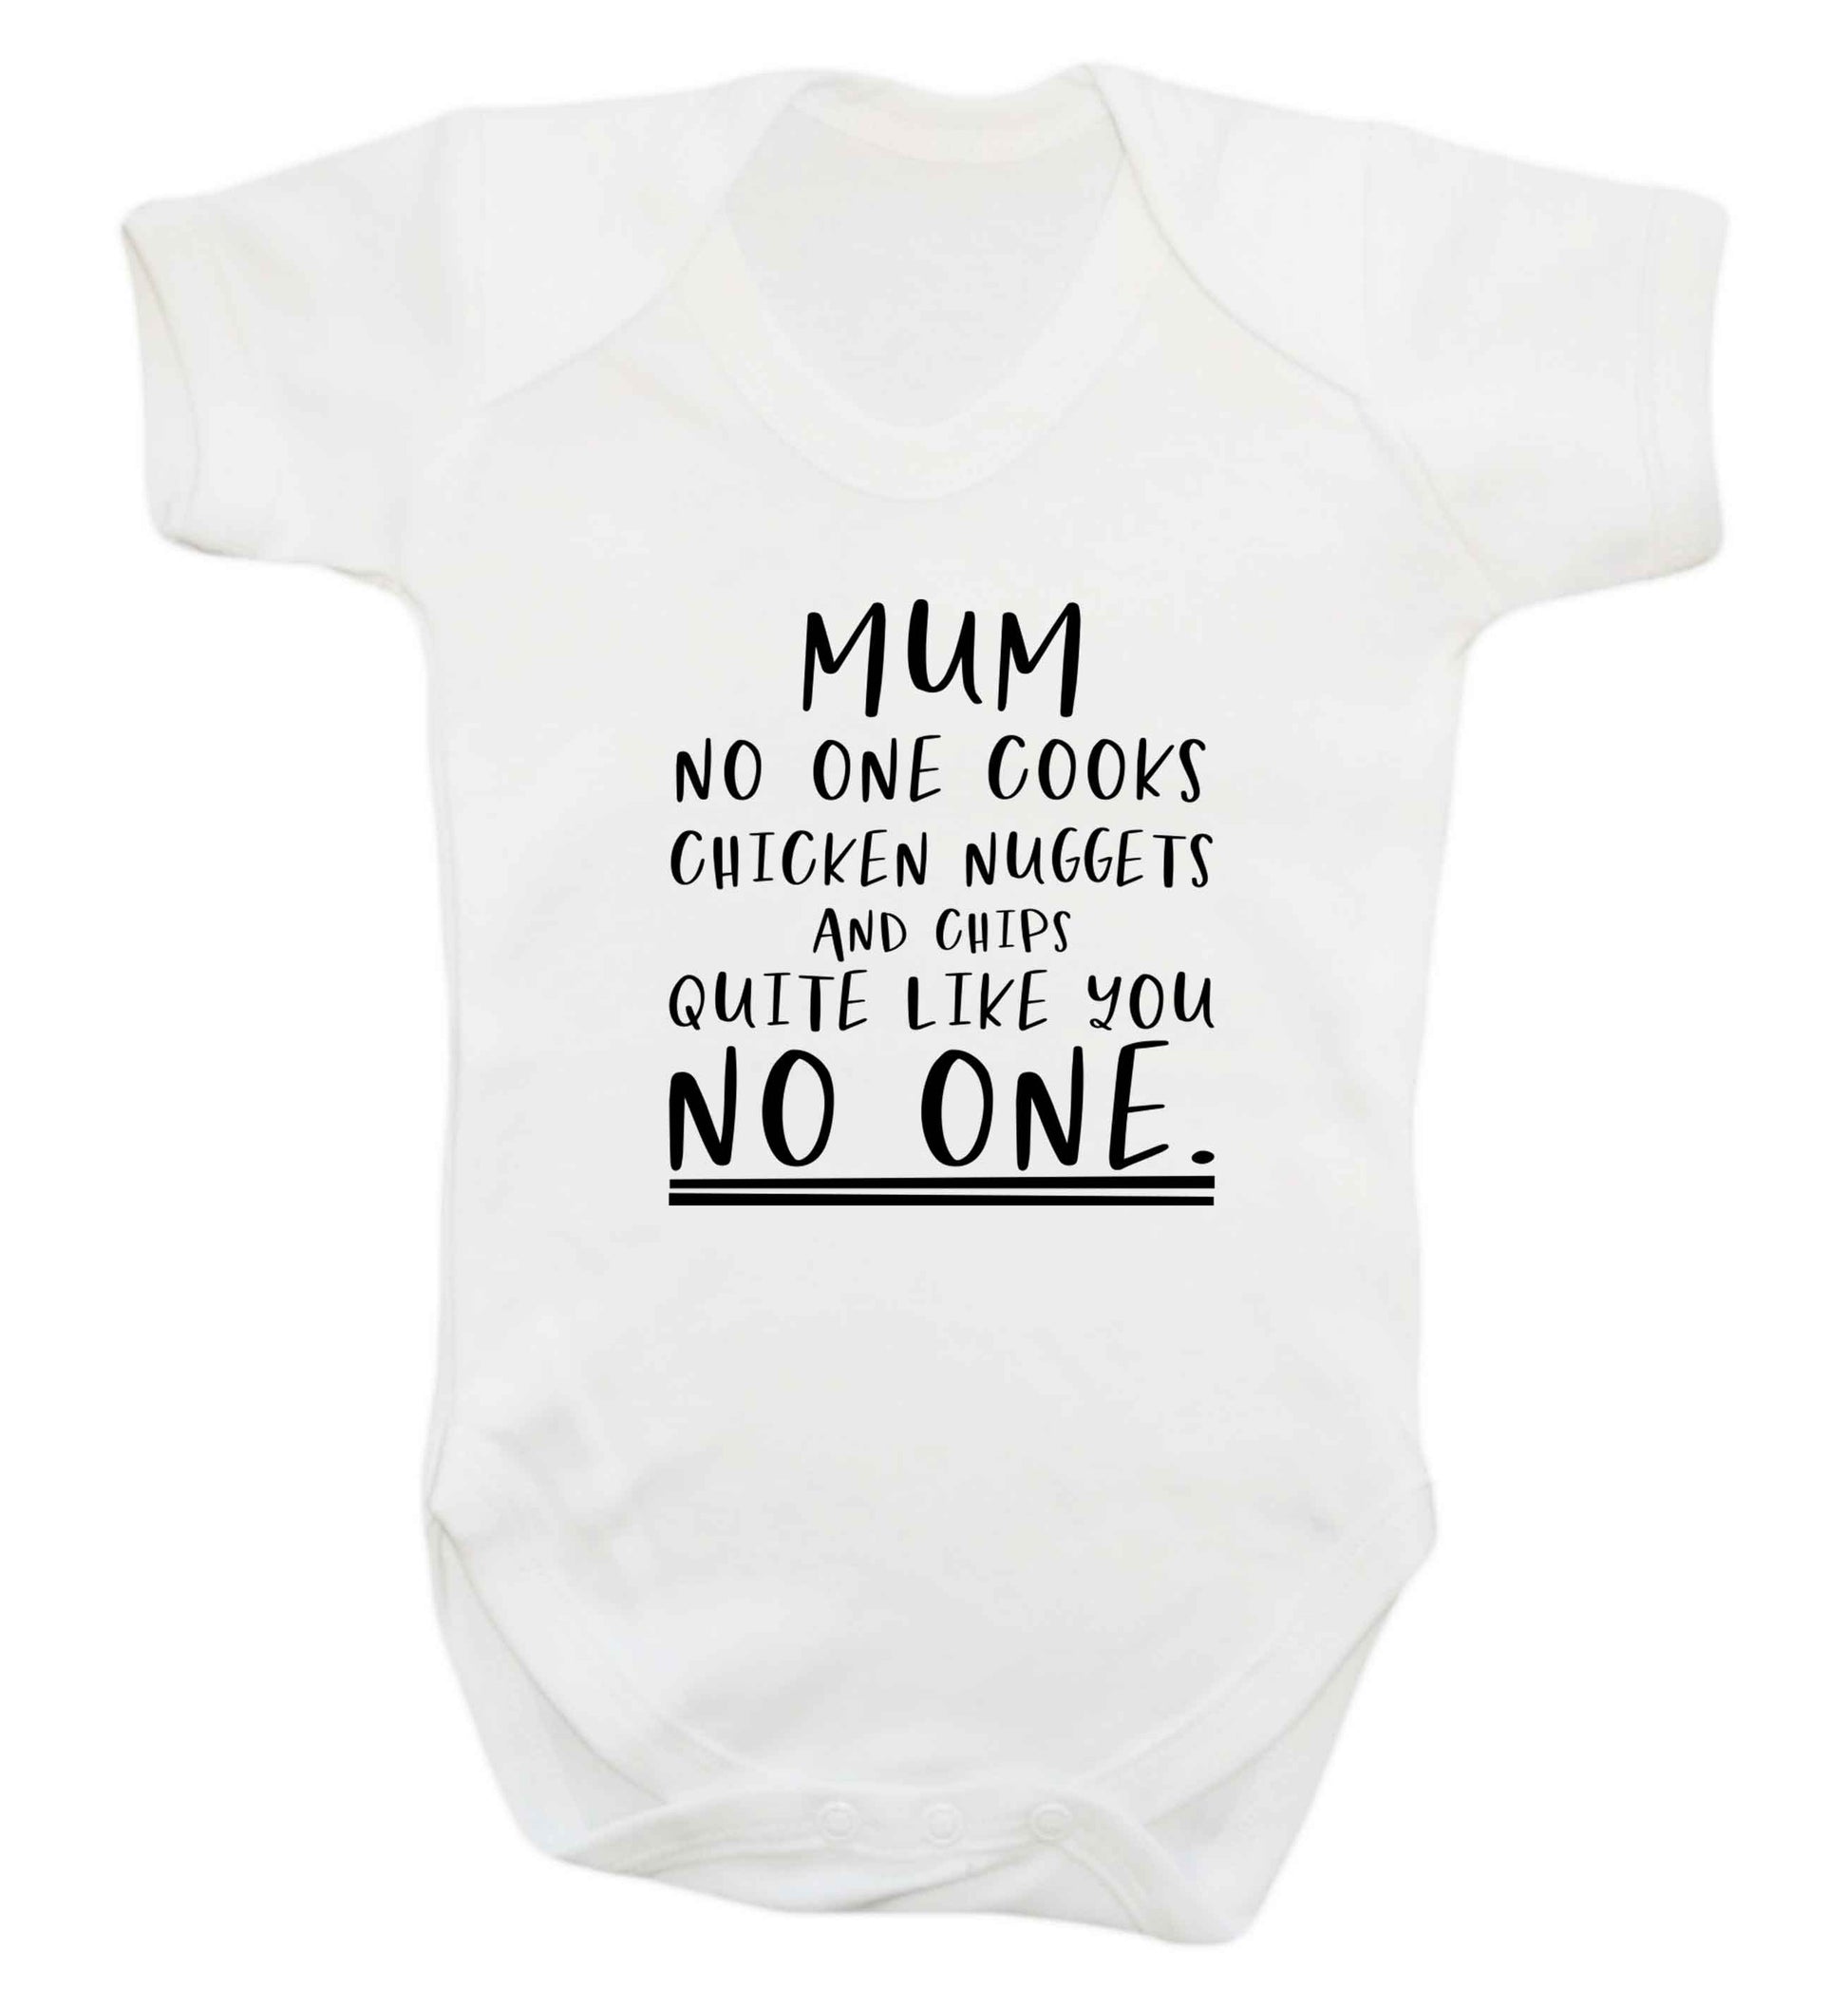 Super funny sassy gift for mother's day or birthday!  Mum no one cooks chicken nuggets and chips like you no one baby vest white 18-24 months